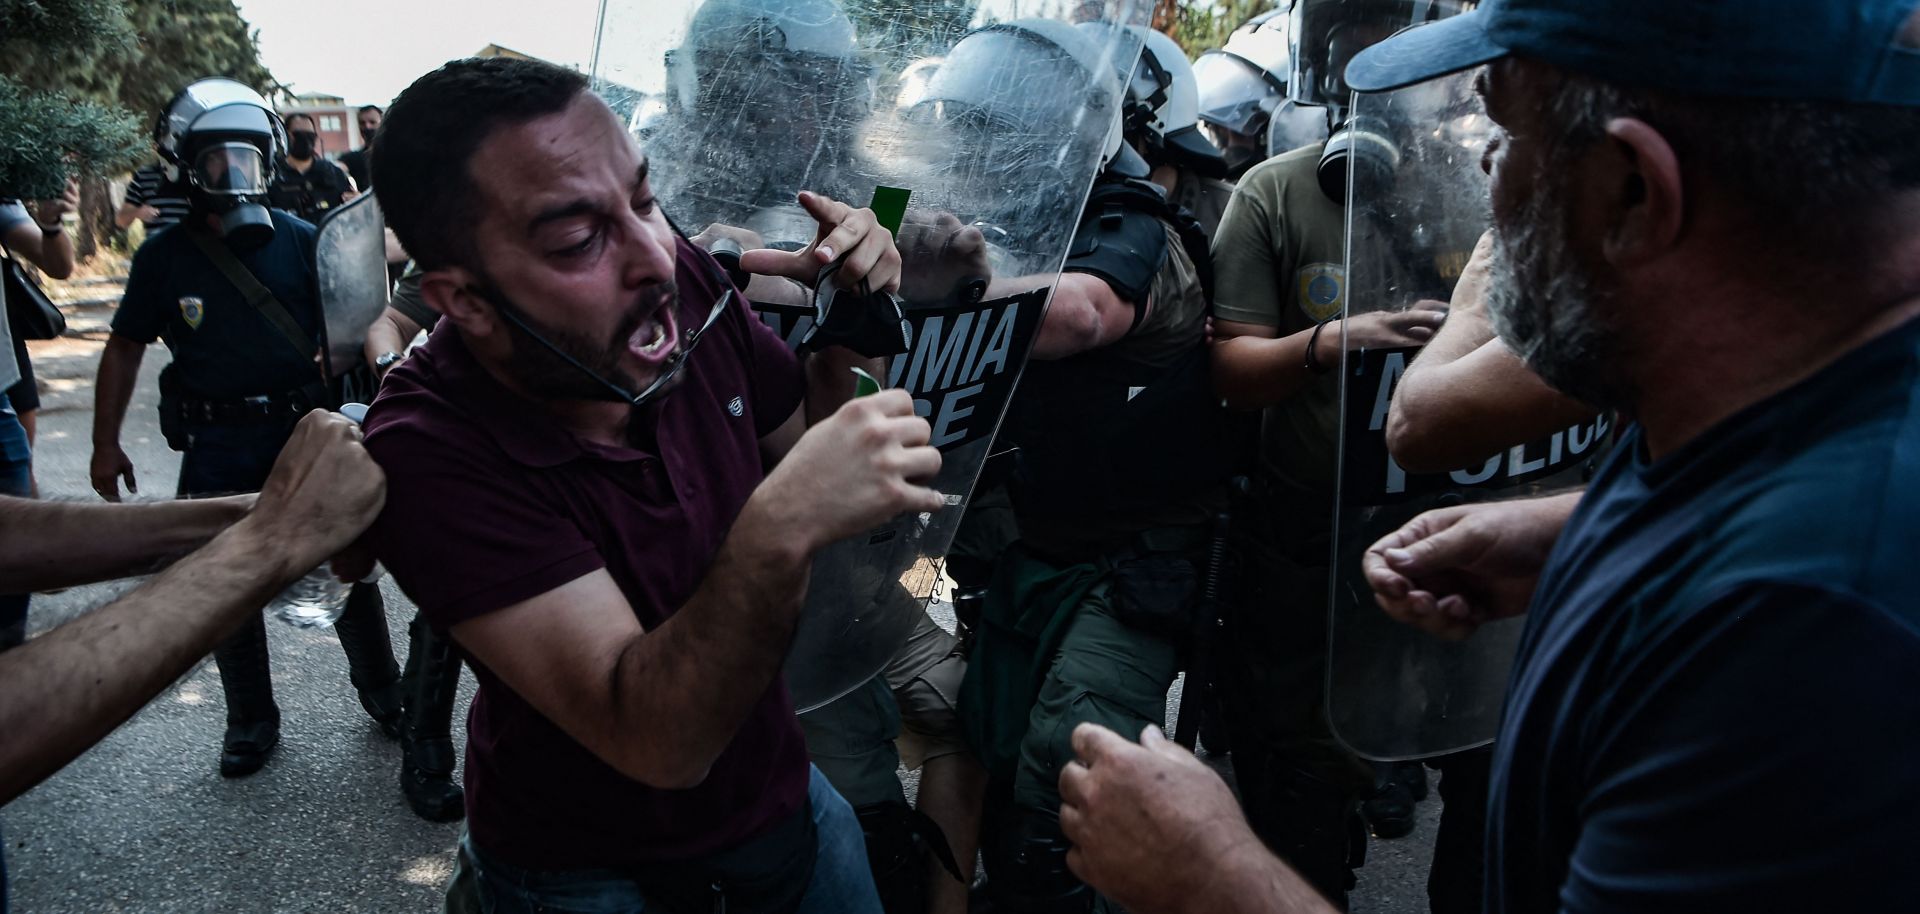 Workers' protest in Greece